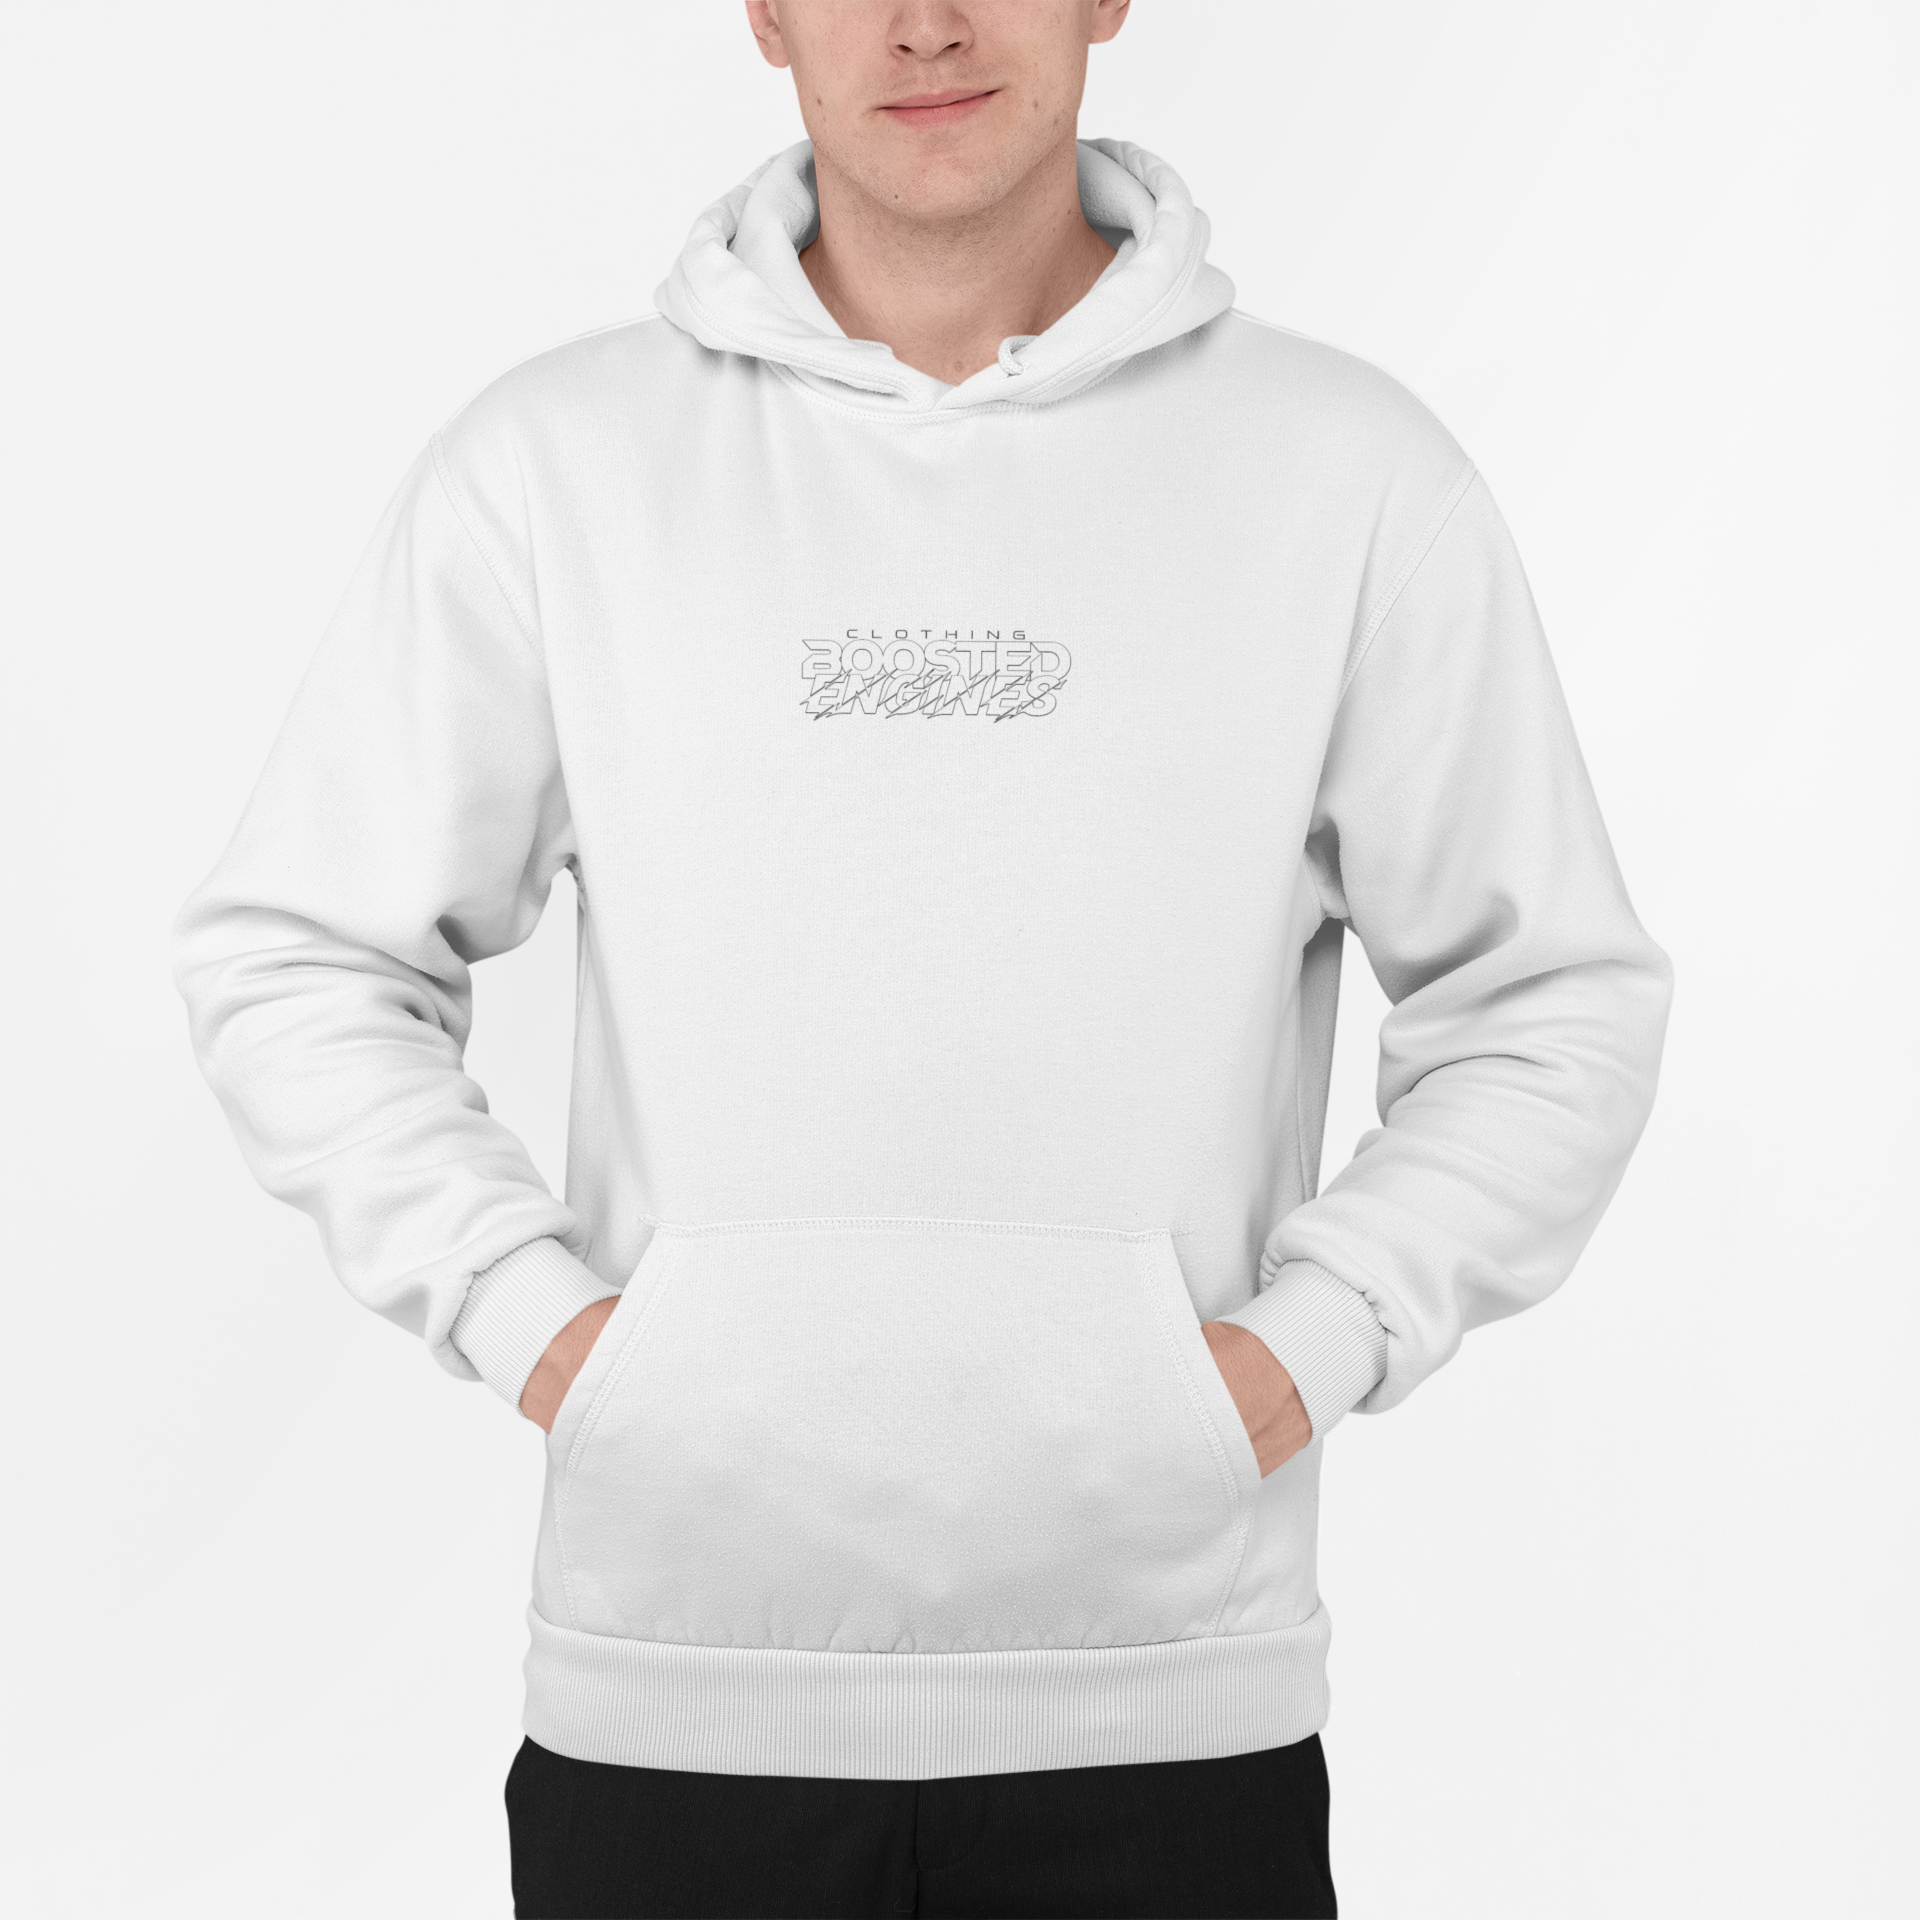 BOOSTED ENGINES ''2JZ POWERED'' MÄNNER HOODIE